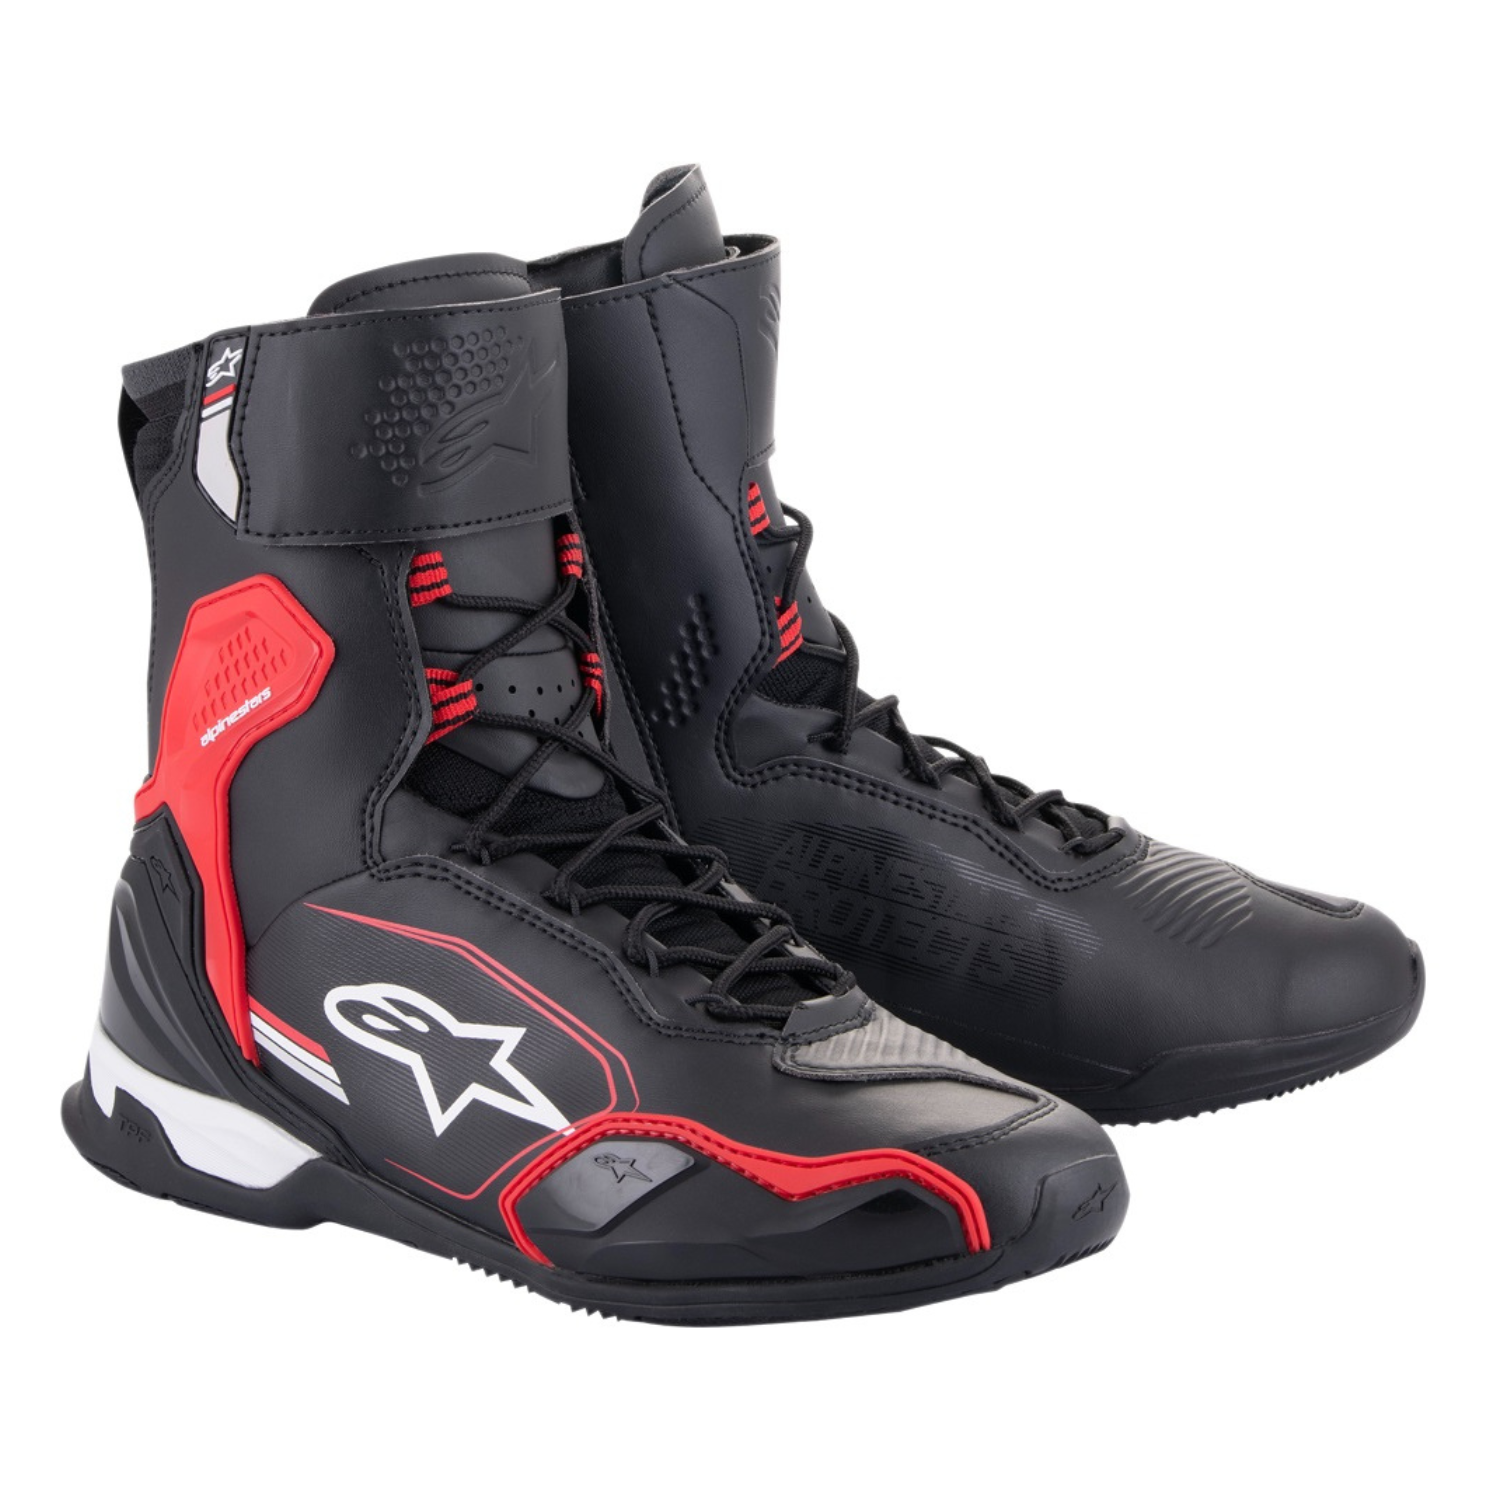 Image of Alpinestars Superfaster Shoes Black Bright Red White Size US 10 ID 8059347260976